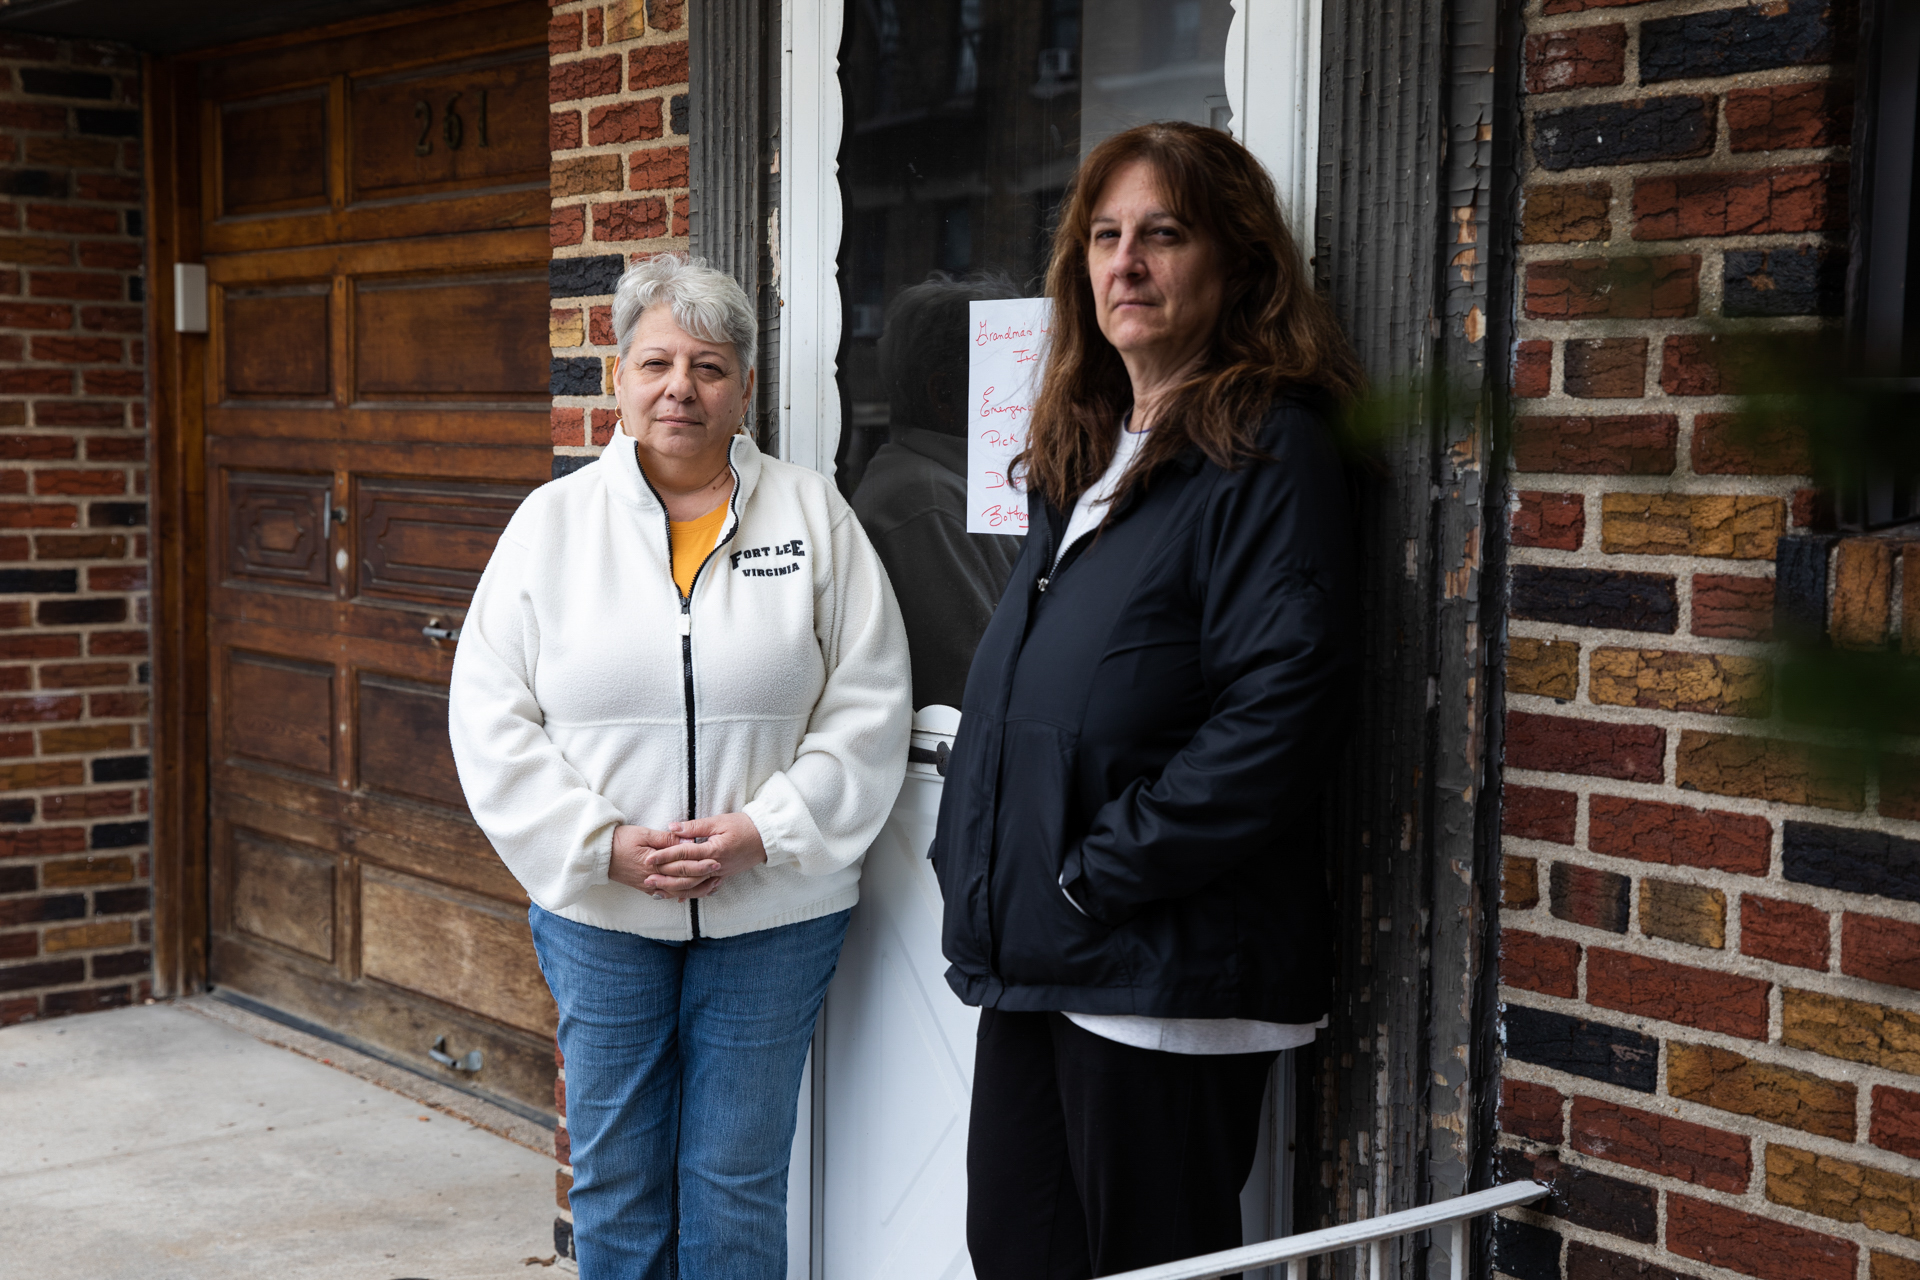 Theresa Monforte-Caraballo, left, and Lisa Lynch of Grandma’s Love are partnering with Bay Ridge Cares to bring care packages to people in southern Brooklyn who can’t leave their homes and can’t afford groceries. Photo: Paul Frangipane/Brooklyn Eagle